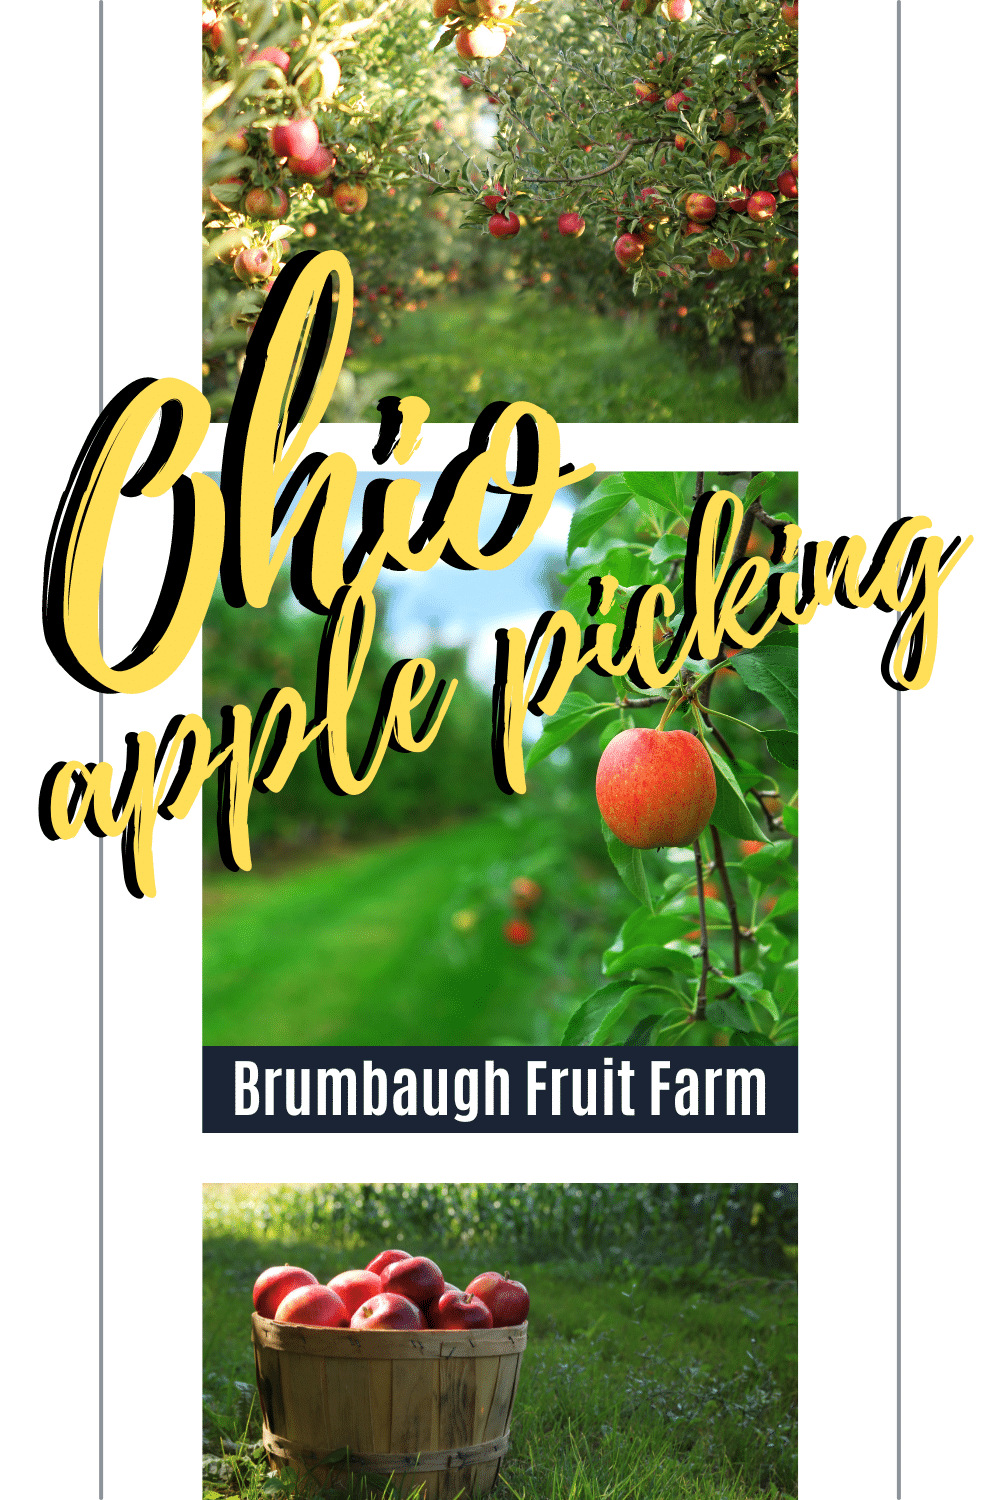 Brumbaugh Fruit Farm is located in Arcanum, Ohio. At Brumbaugh Fruit Farm you can find lots of fun Fall activities and Fall themed food.